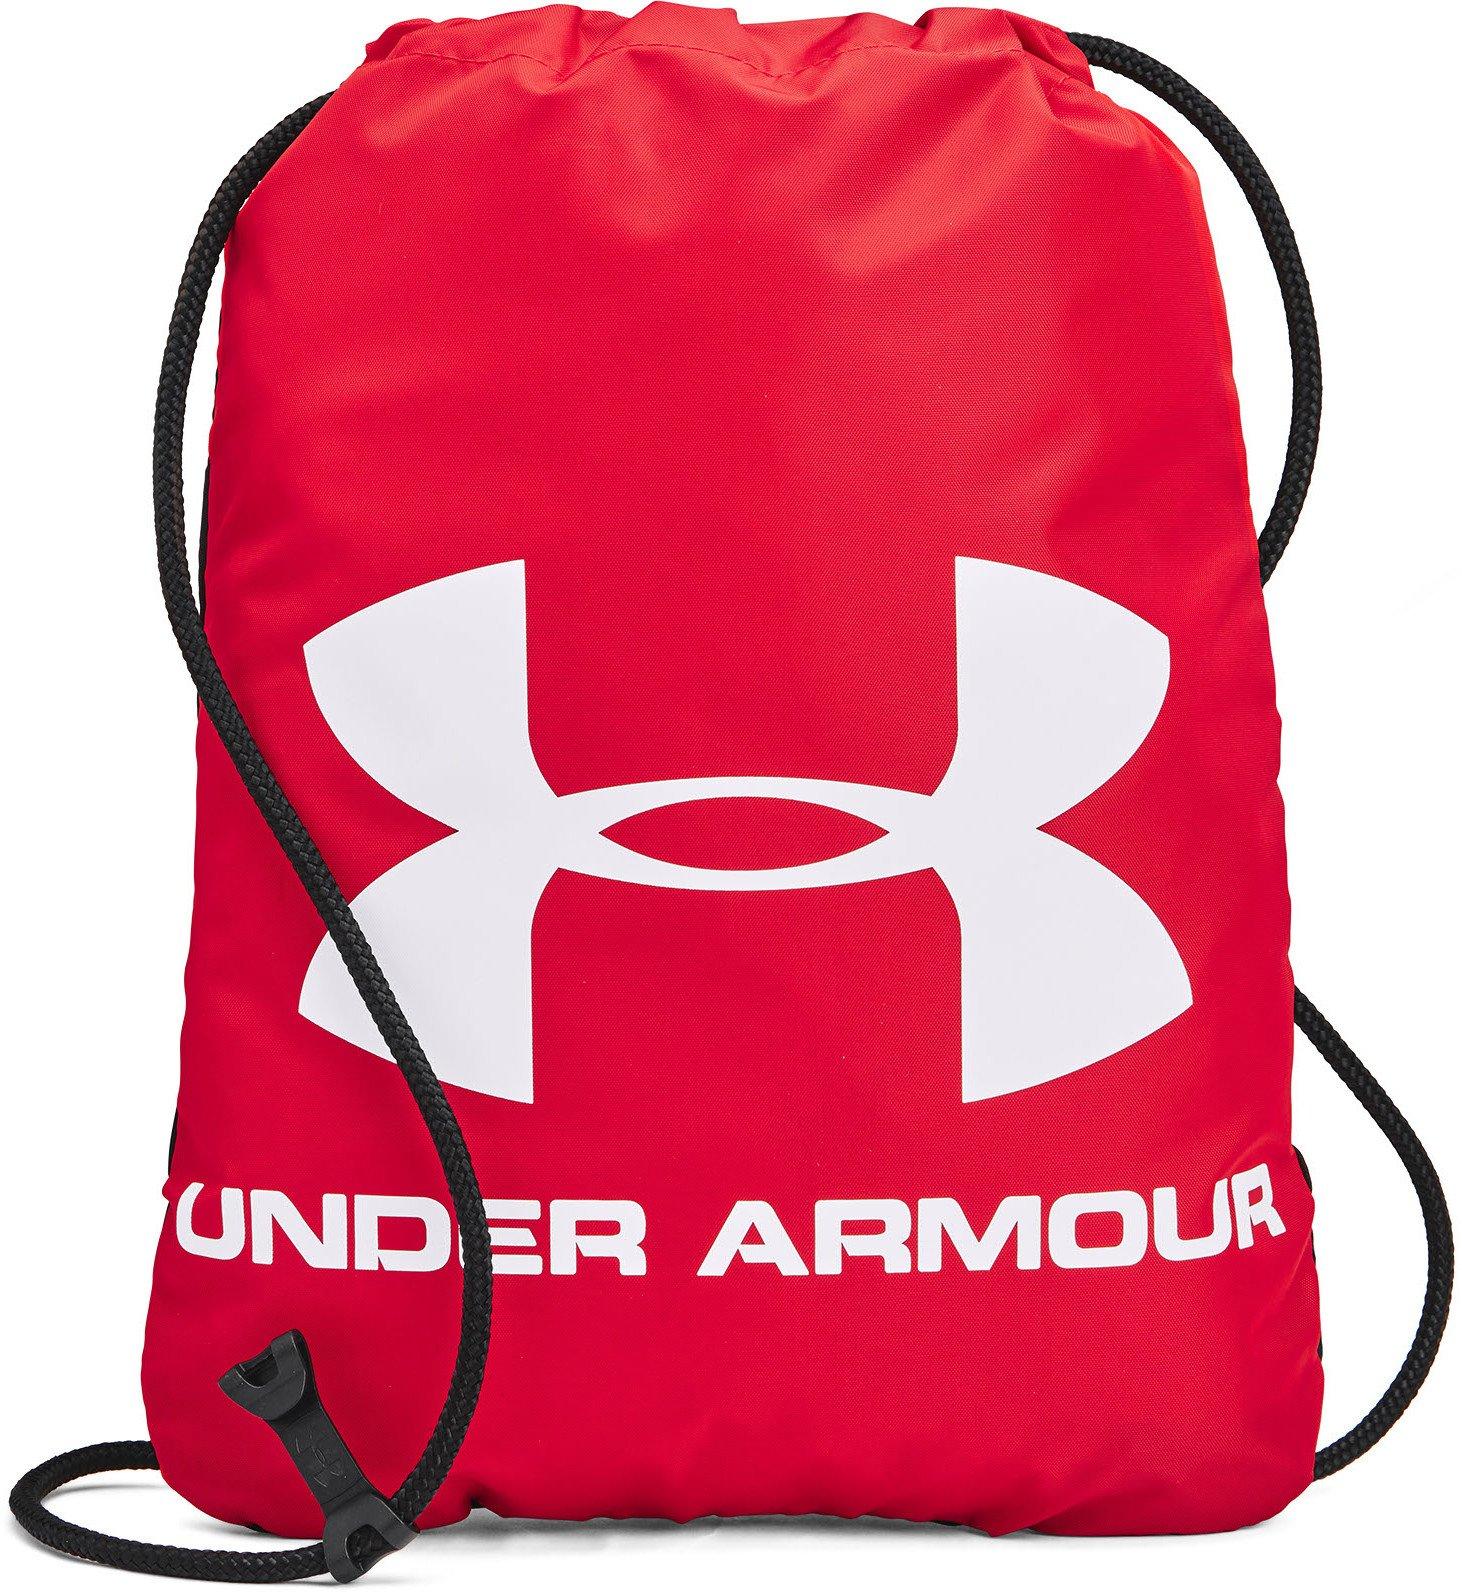 Under Armour Ozsee Sackpack-RED